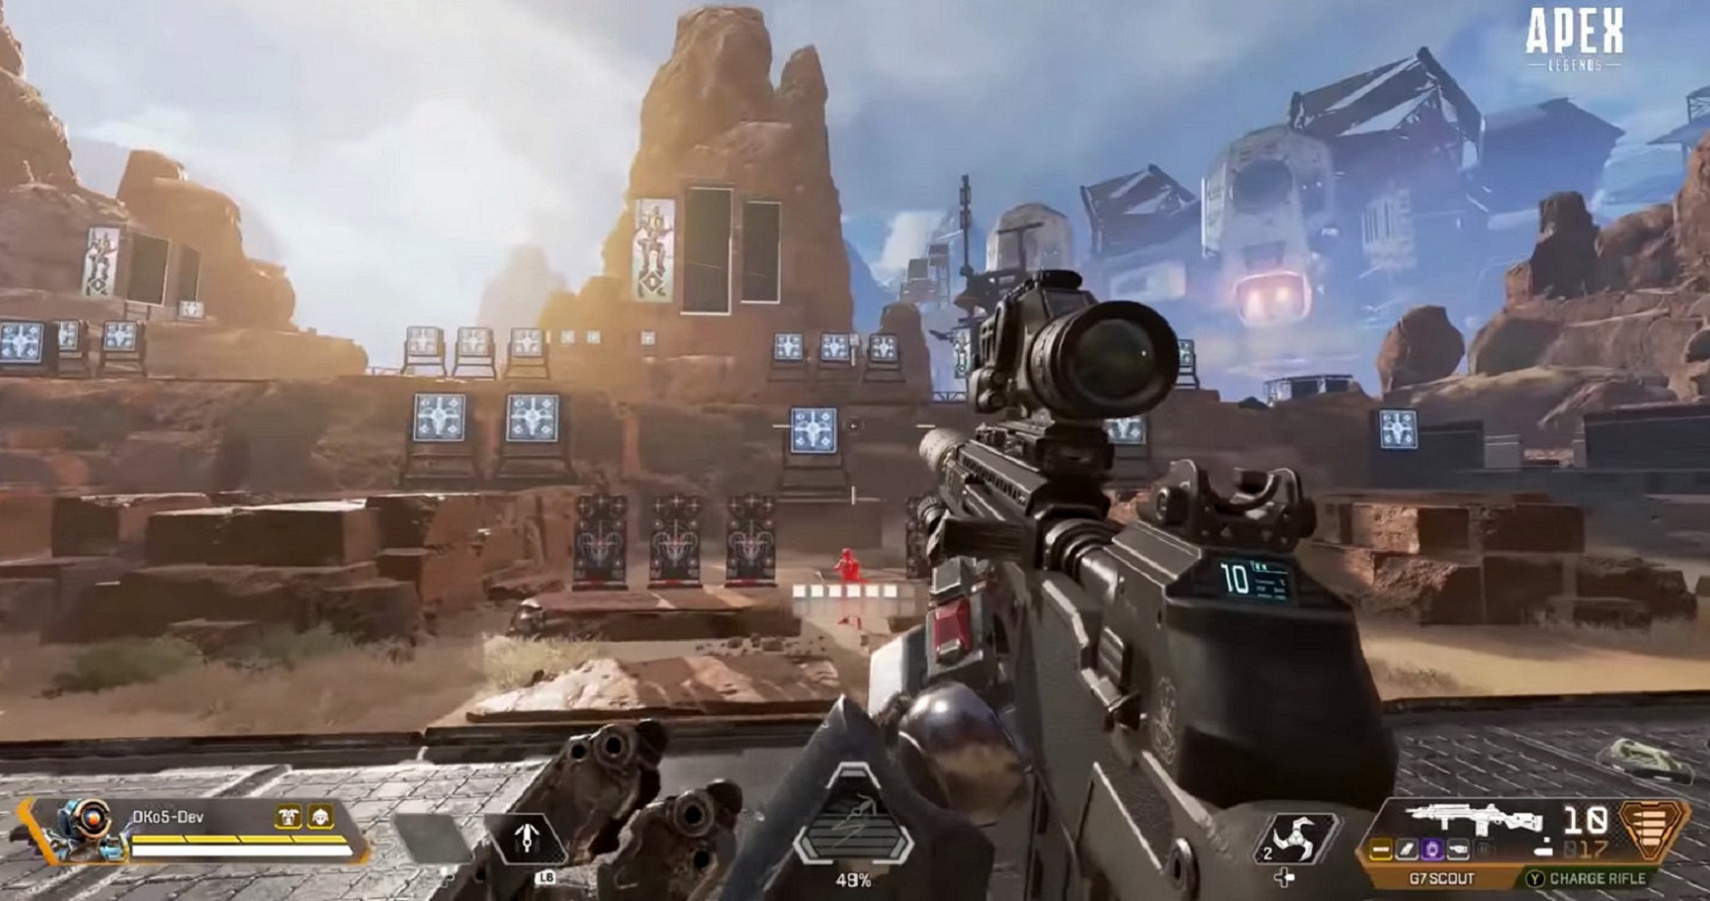 Apex Legends Firing Range Is Ready For Players To Give A Shot